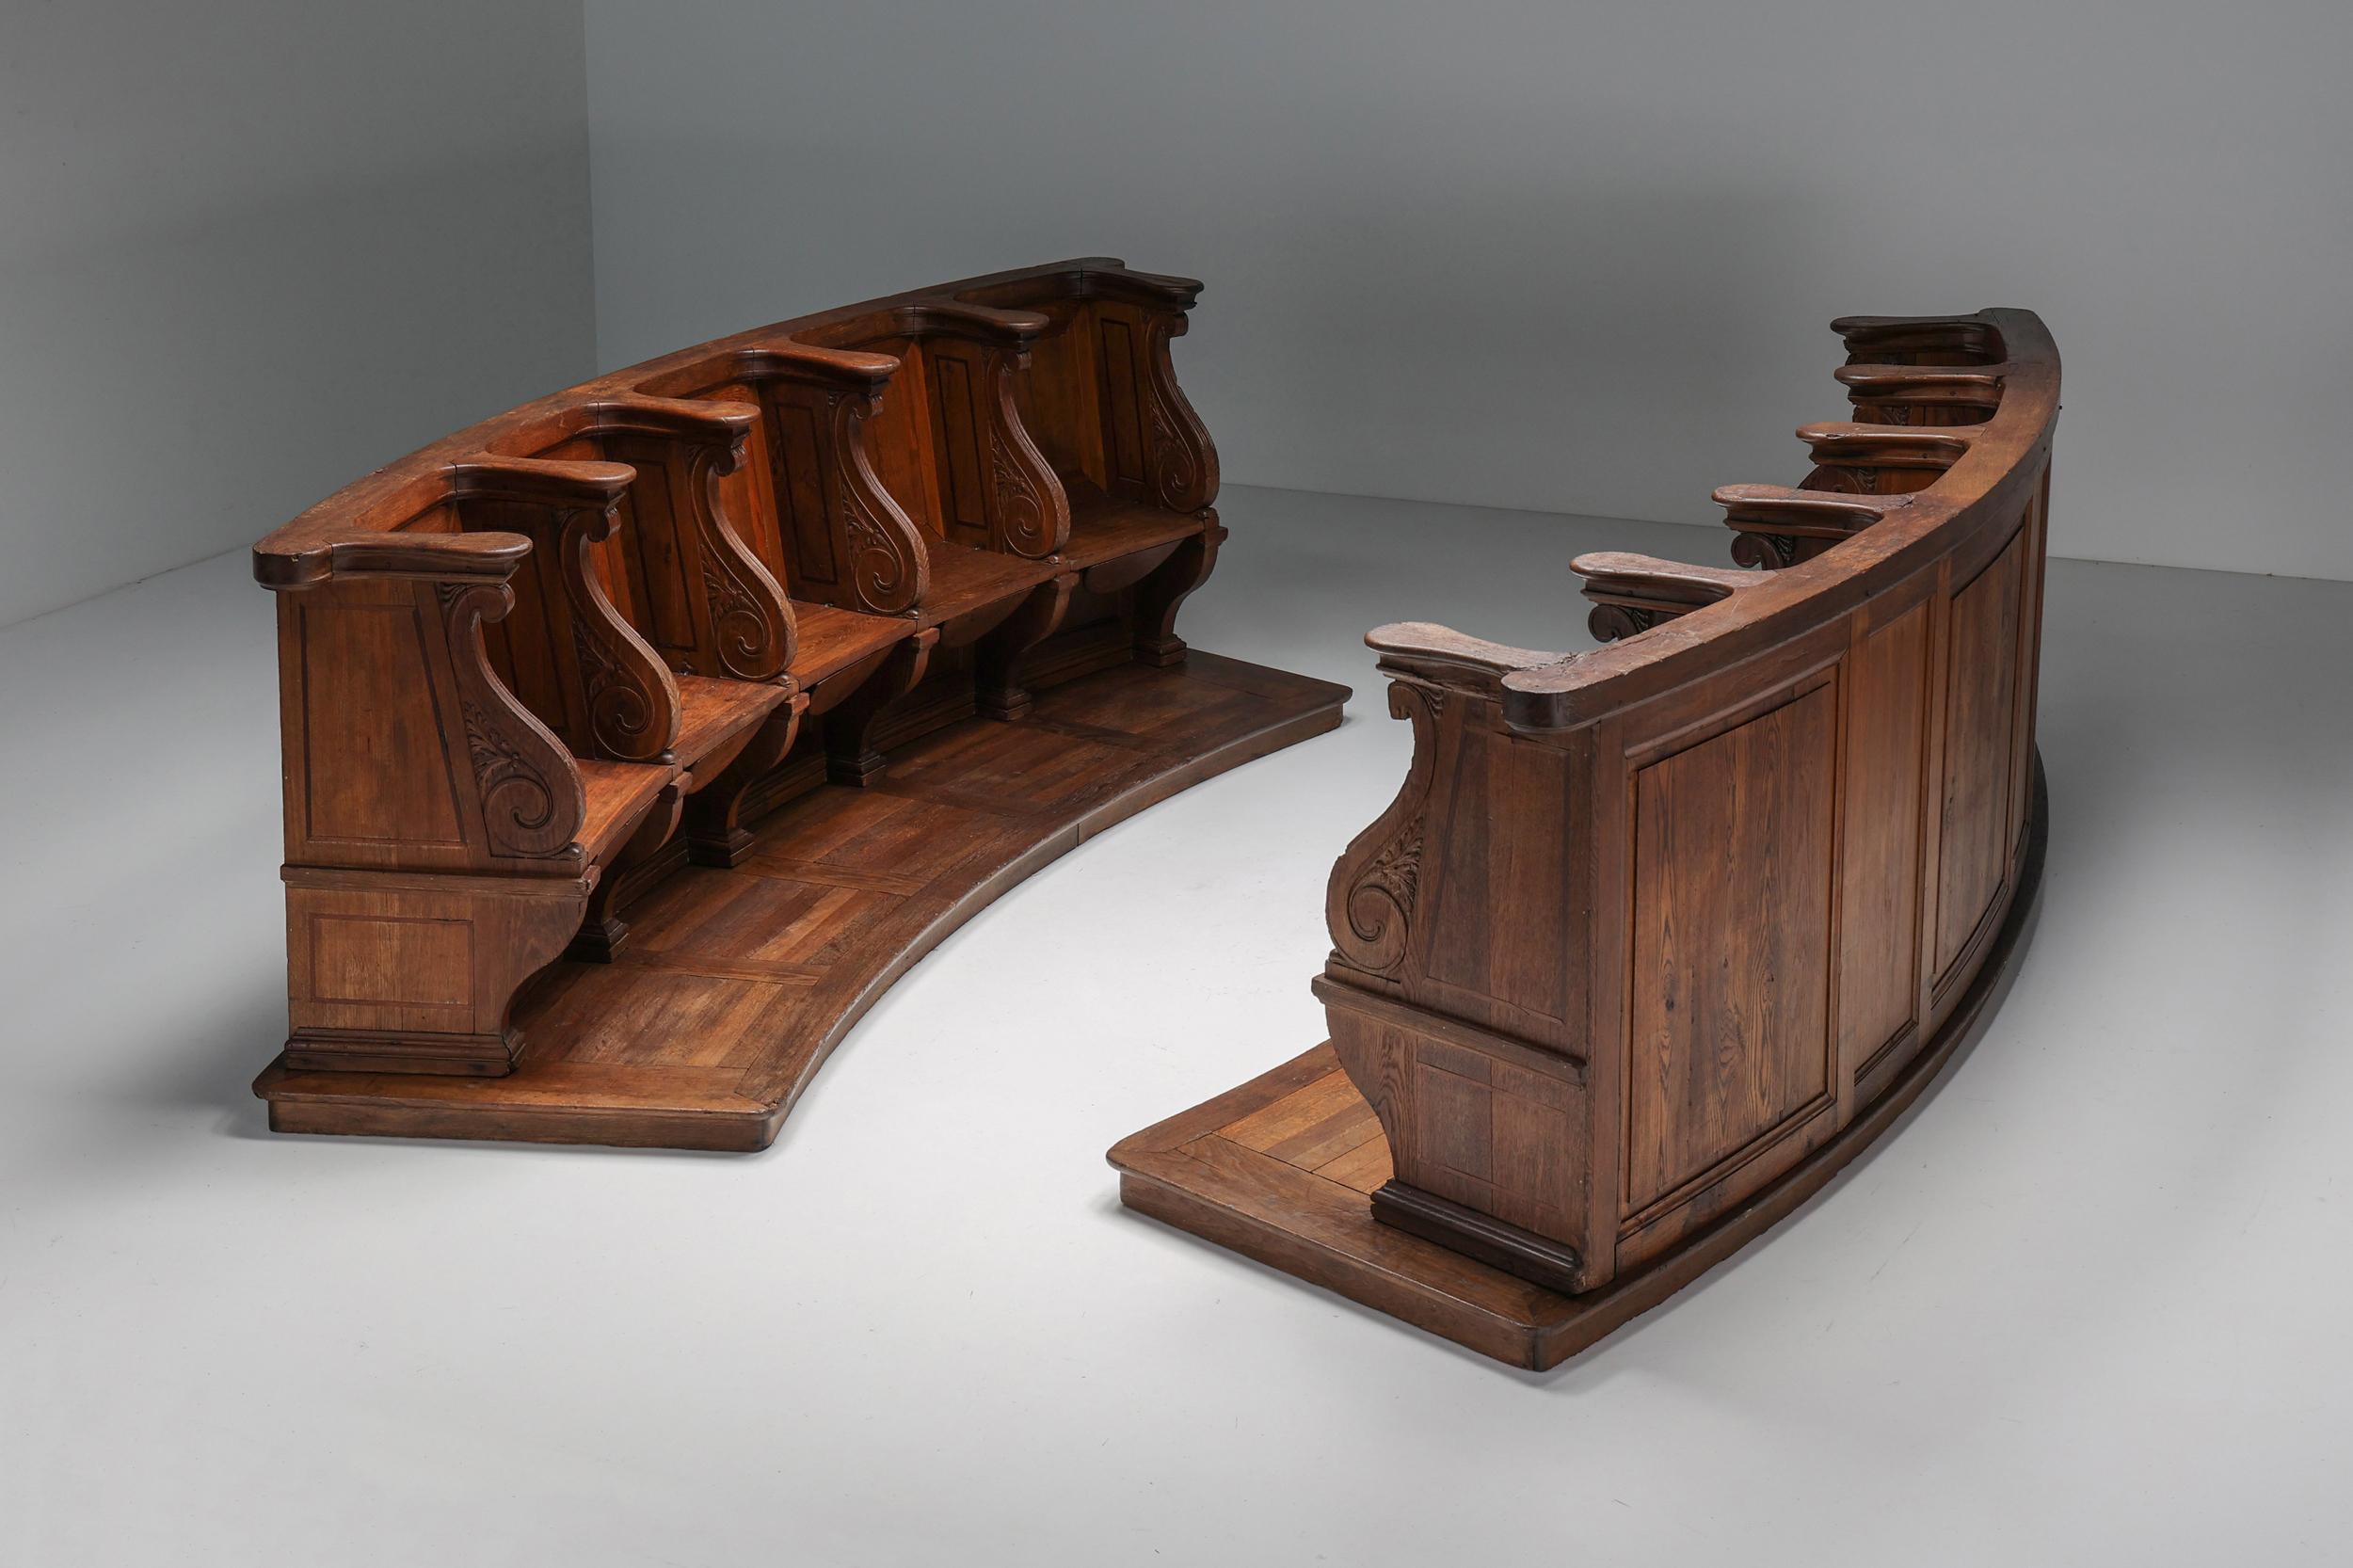 Flemish; oak; wood; pews; 18th century; church pew; belgium; hallway; bench; antique; pew; folding seats;

Flemish 18th century church pews, crafted from thick and solid oak wood. A remarkable and unusual piece, featuring curved sides and carved